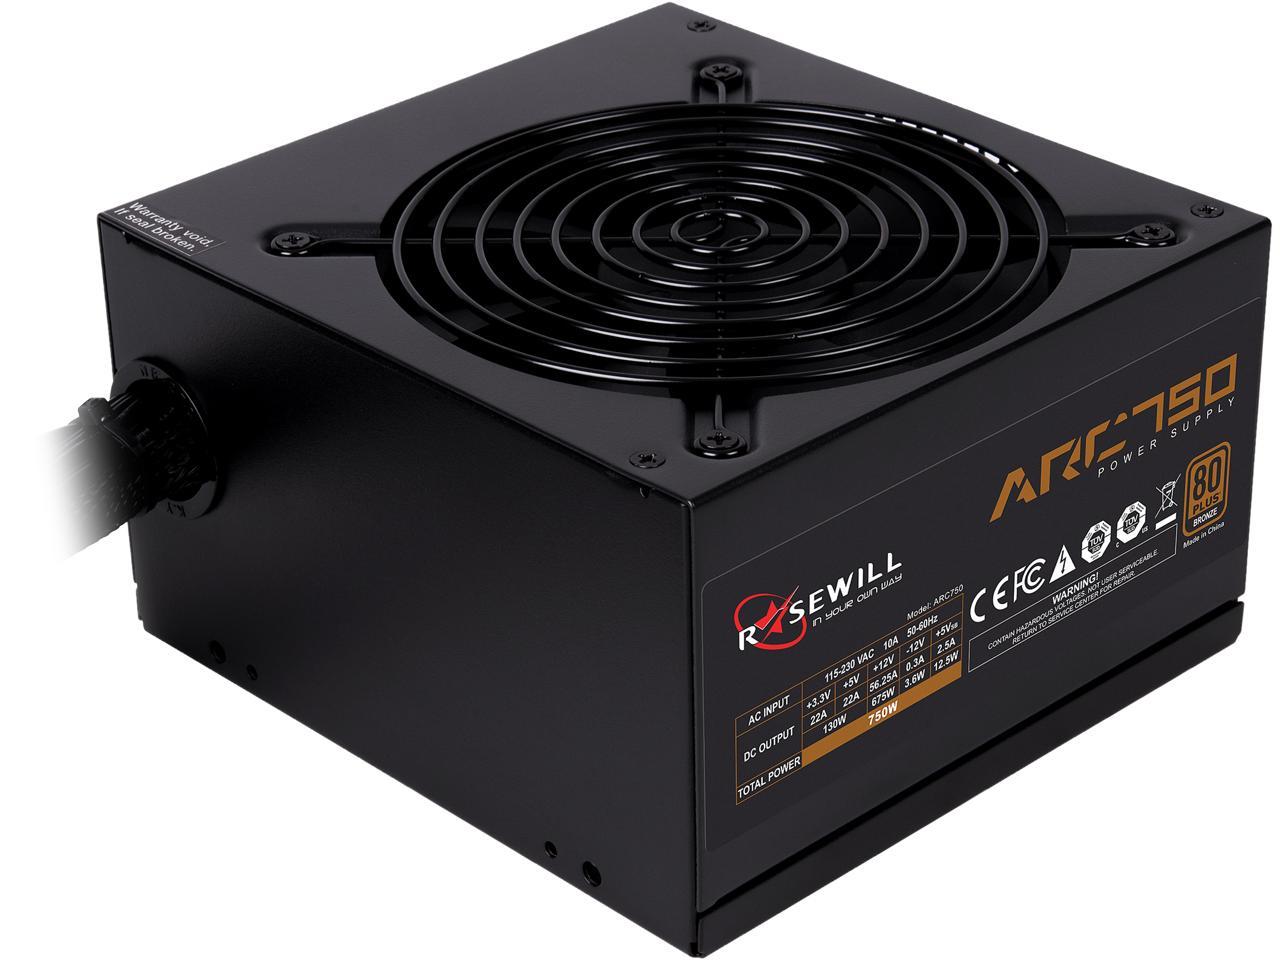 Rosewill ARC Series 750W 80 PLUS Bronze Certified Single +12V Rail Intel 4th Gen CPU SLI and CrossFire Ready Gaming Power Supply $57.99